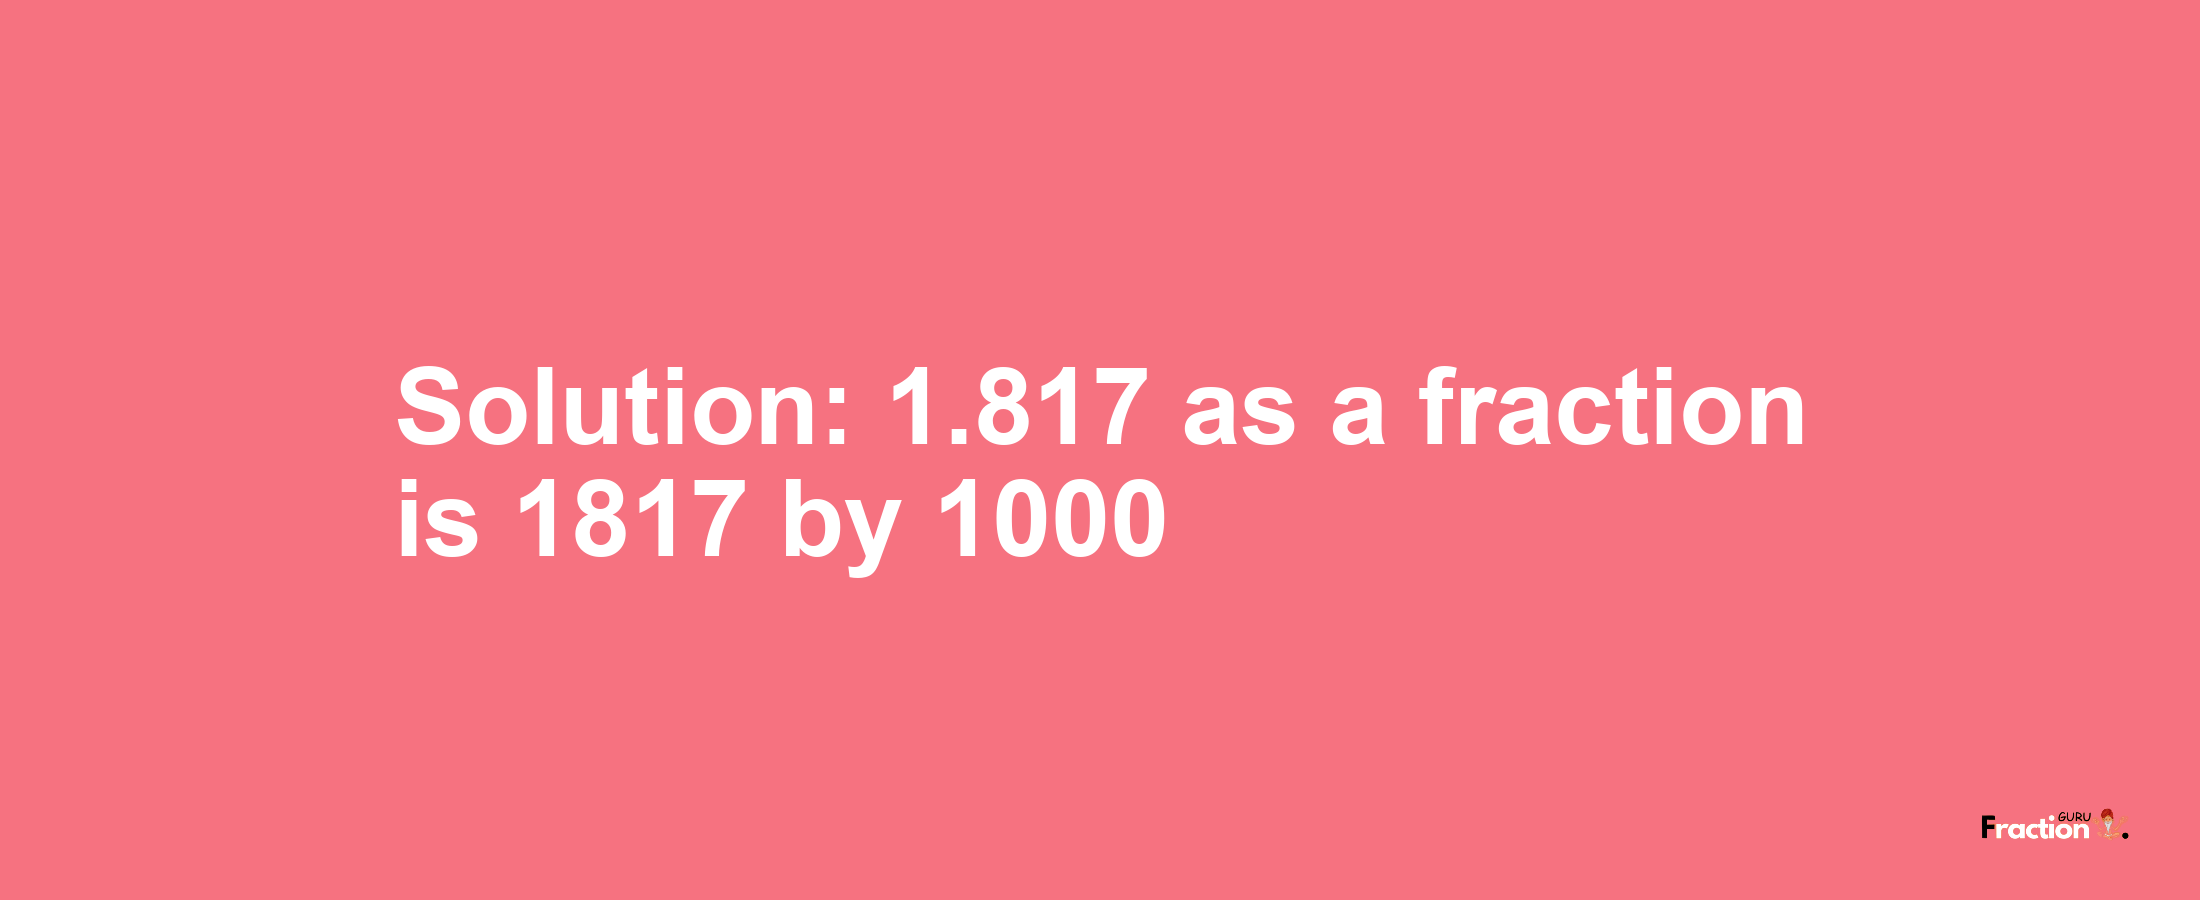 Solution:1.817 as a fraction is 1817/1000